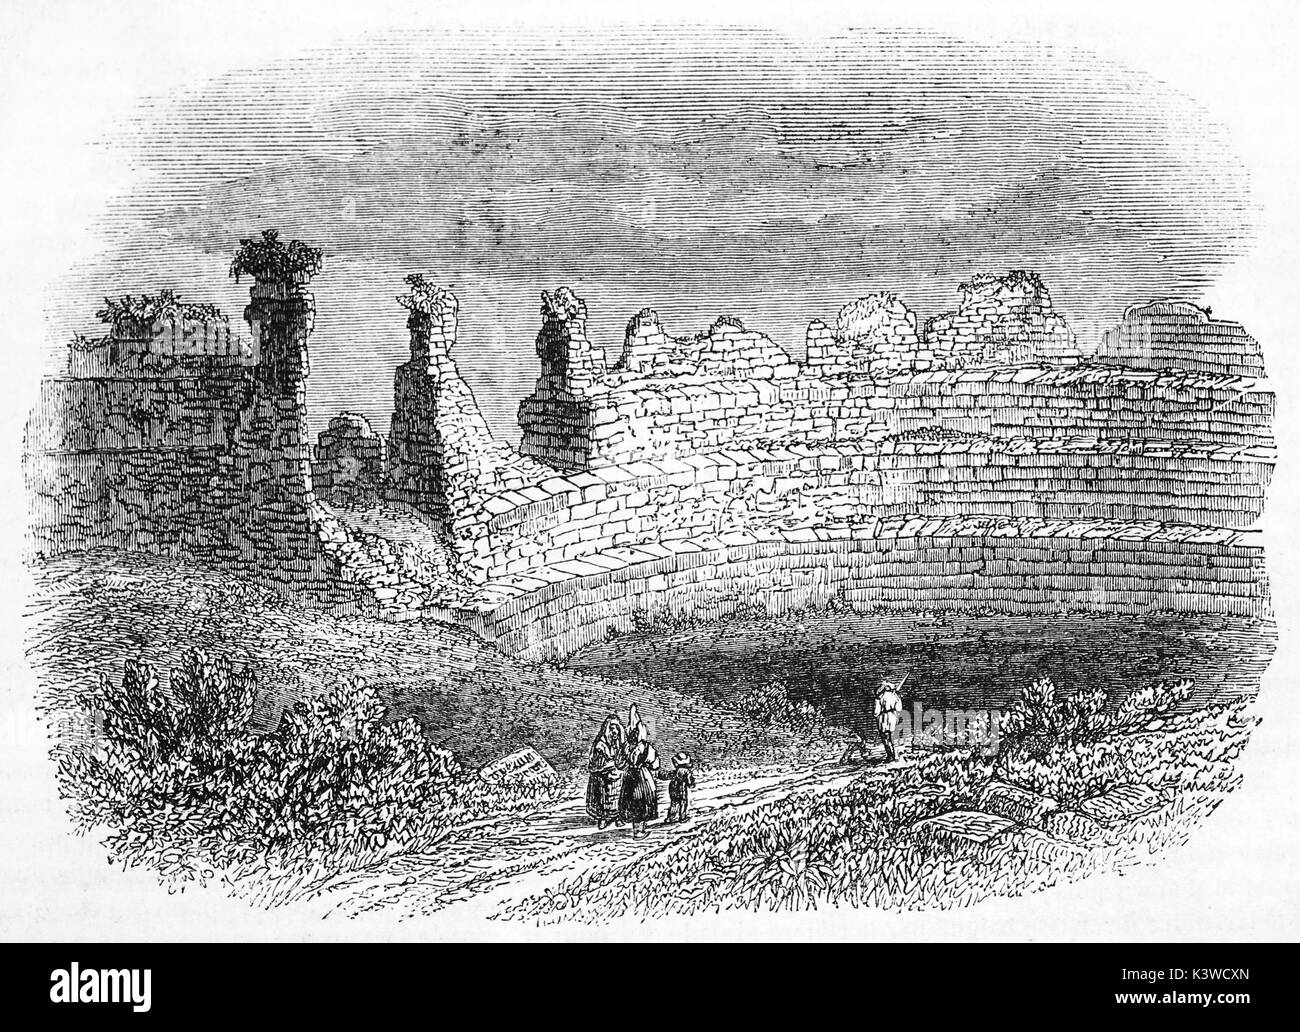 Old view of Lillebonne roman theater, France. By unidentified author, published on Magasin Pittoresque, Paris, 1841 Stock Photo